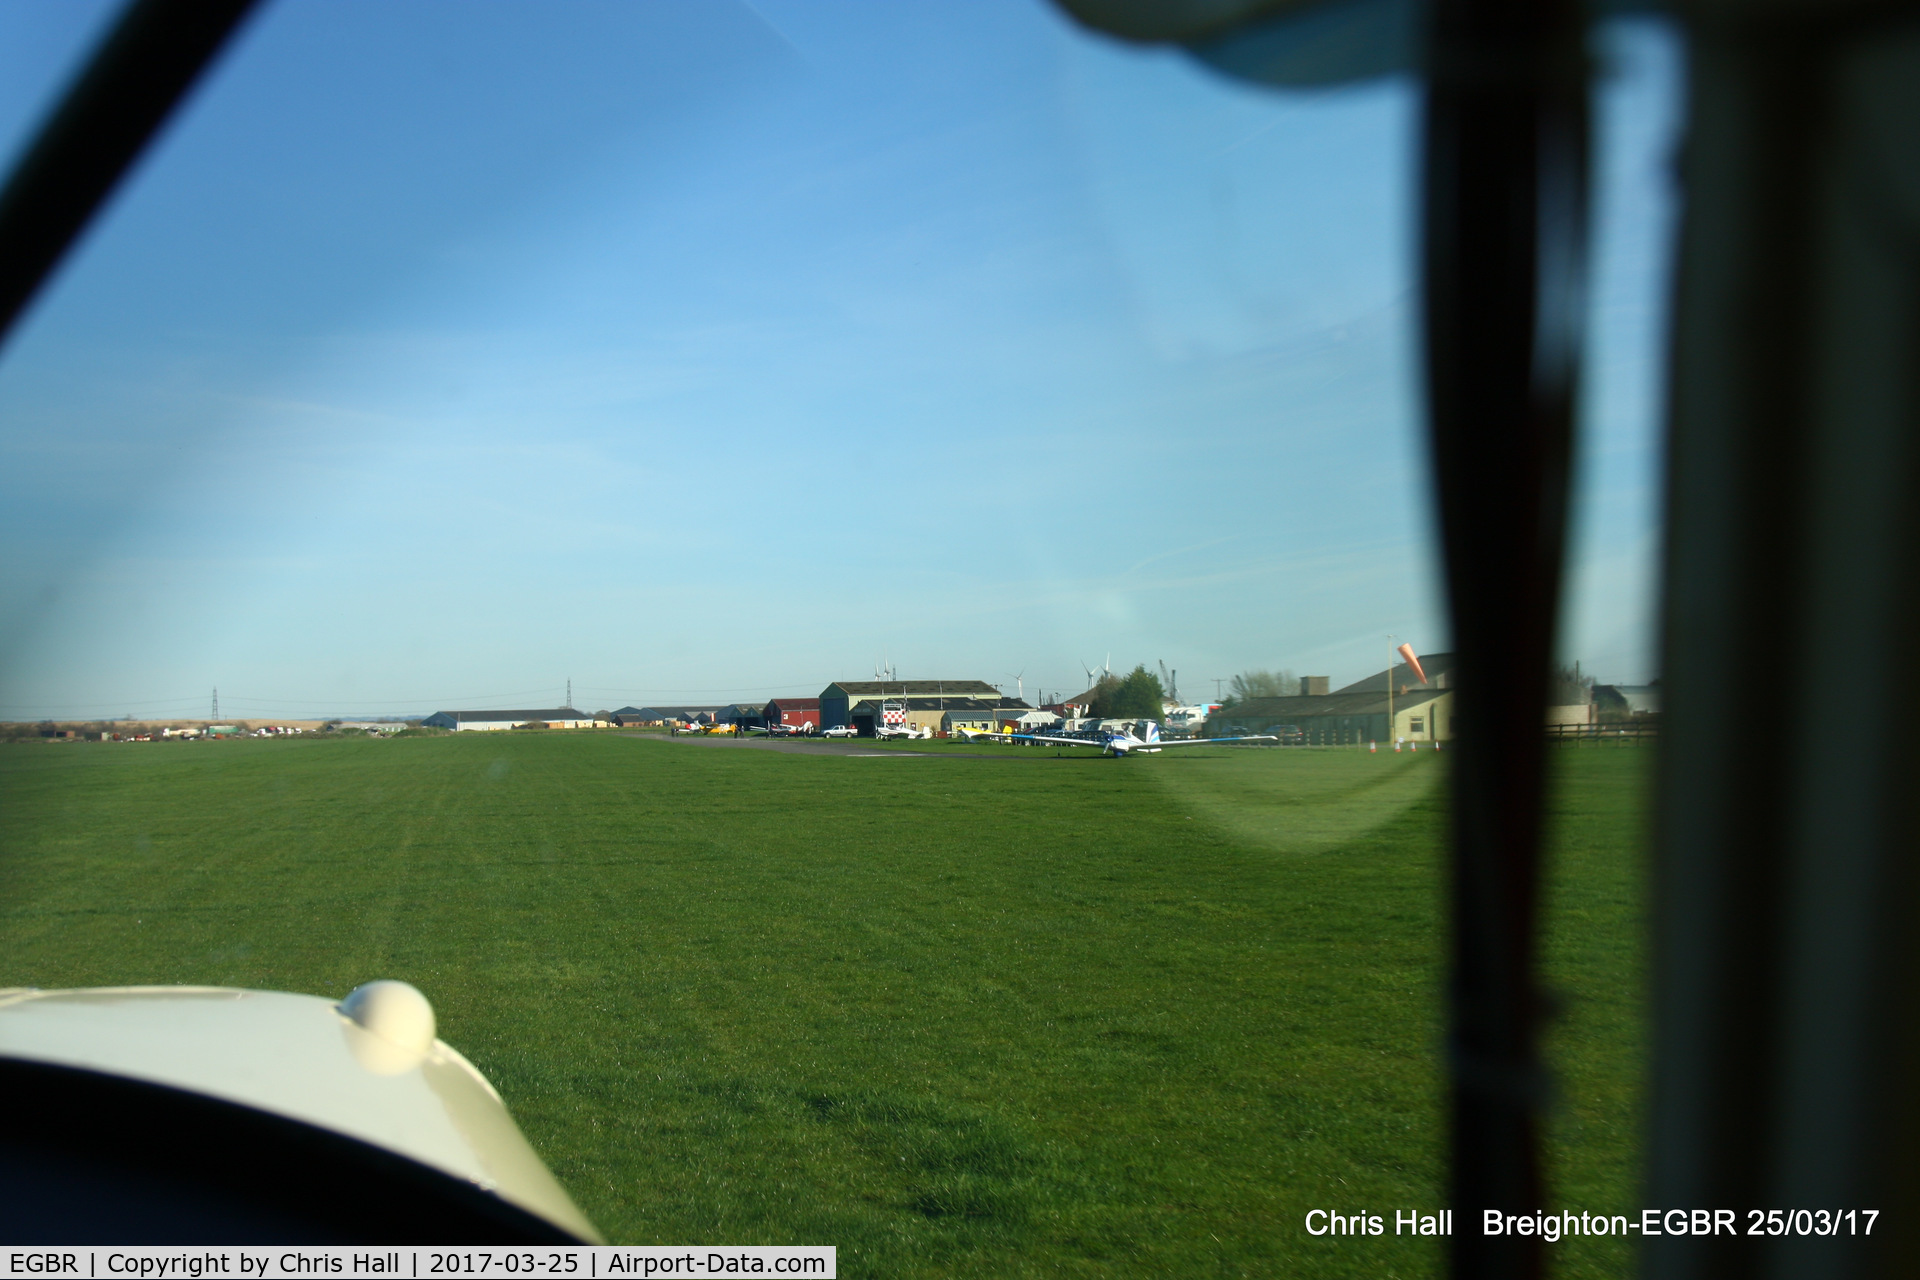 EGBR Airport - departing from Breighton in Piper PA-15 Vagabond G-BRPY